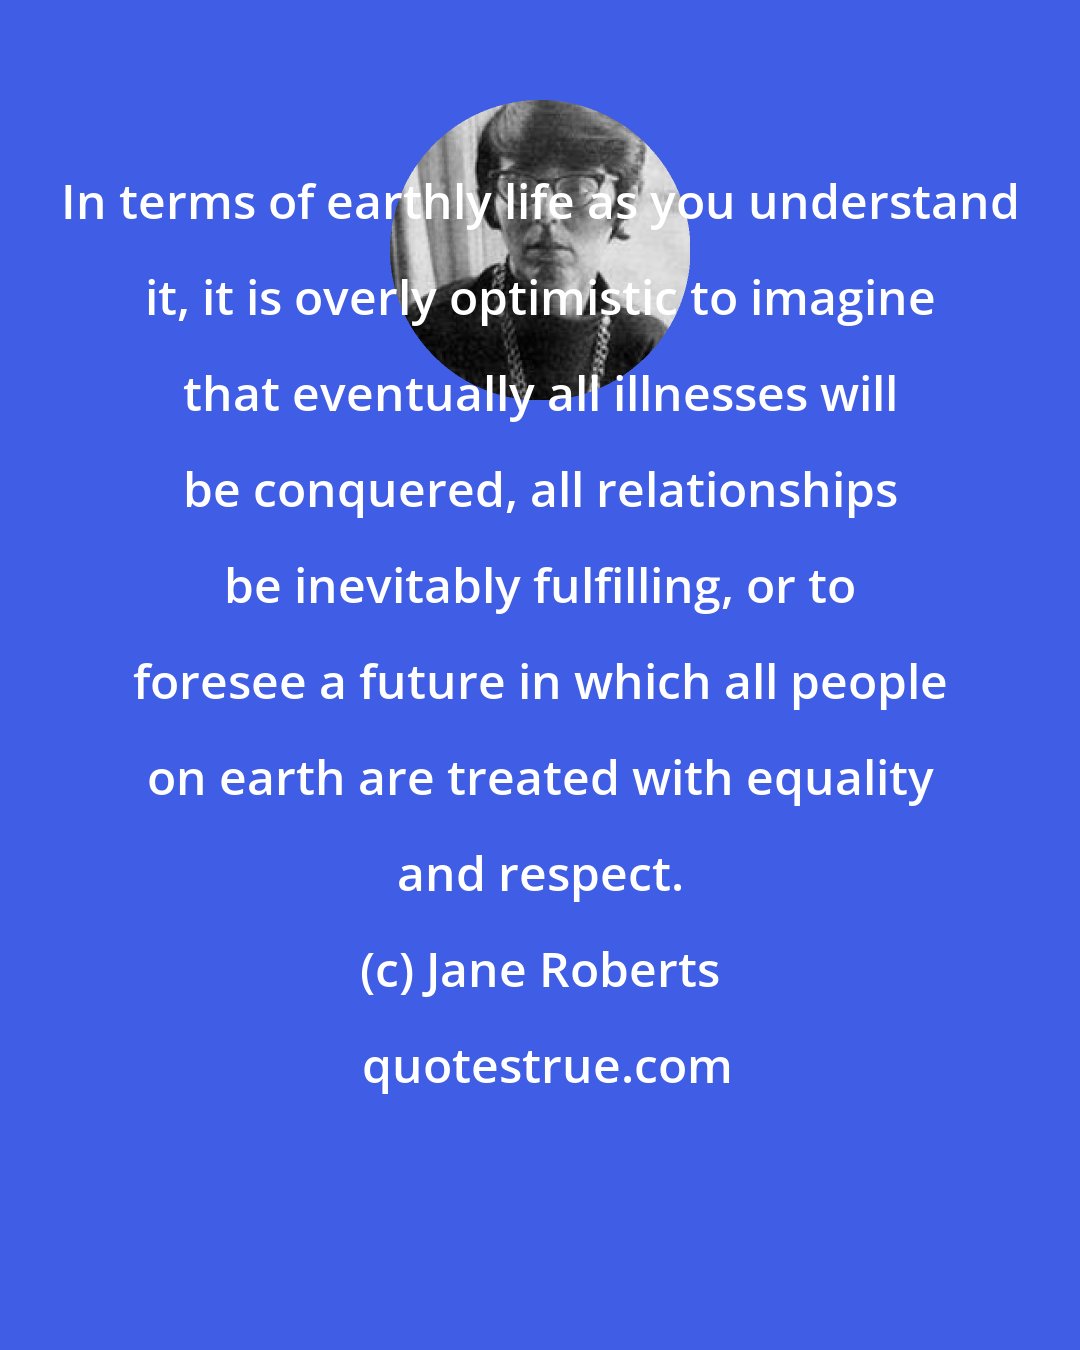 Jane Roberts: In terms of earthly life as you understand it, it is overly optimistic to imagine that eventually all illnesses will be conquered, all relationships be inevitably fulfilling, or to foresee a future in which all people on earth are treated with equality and respect.